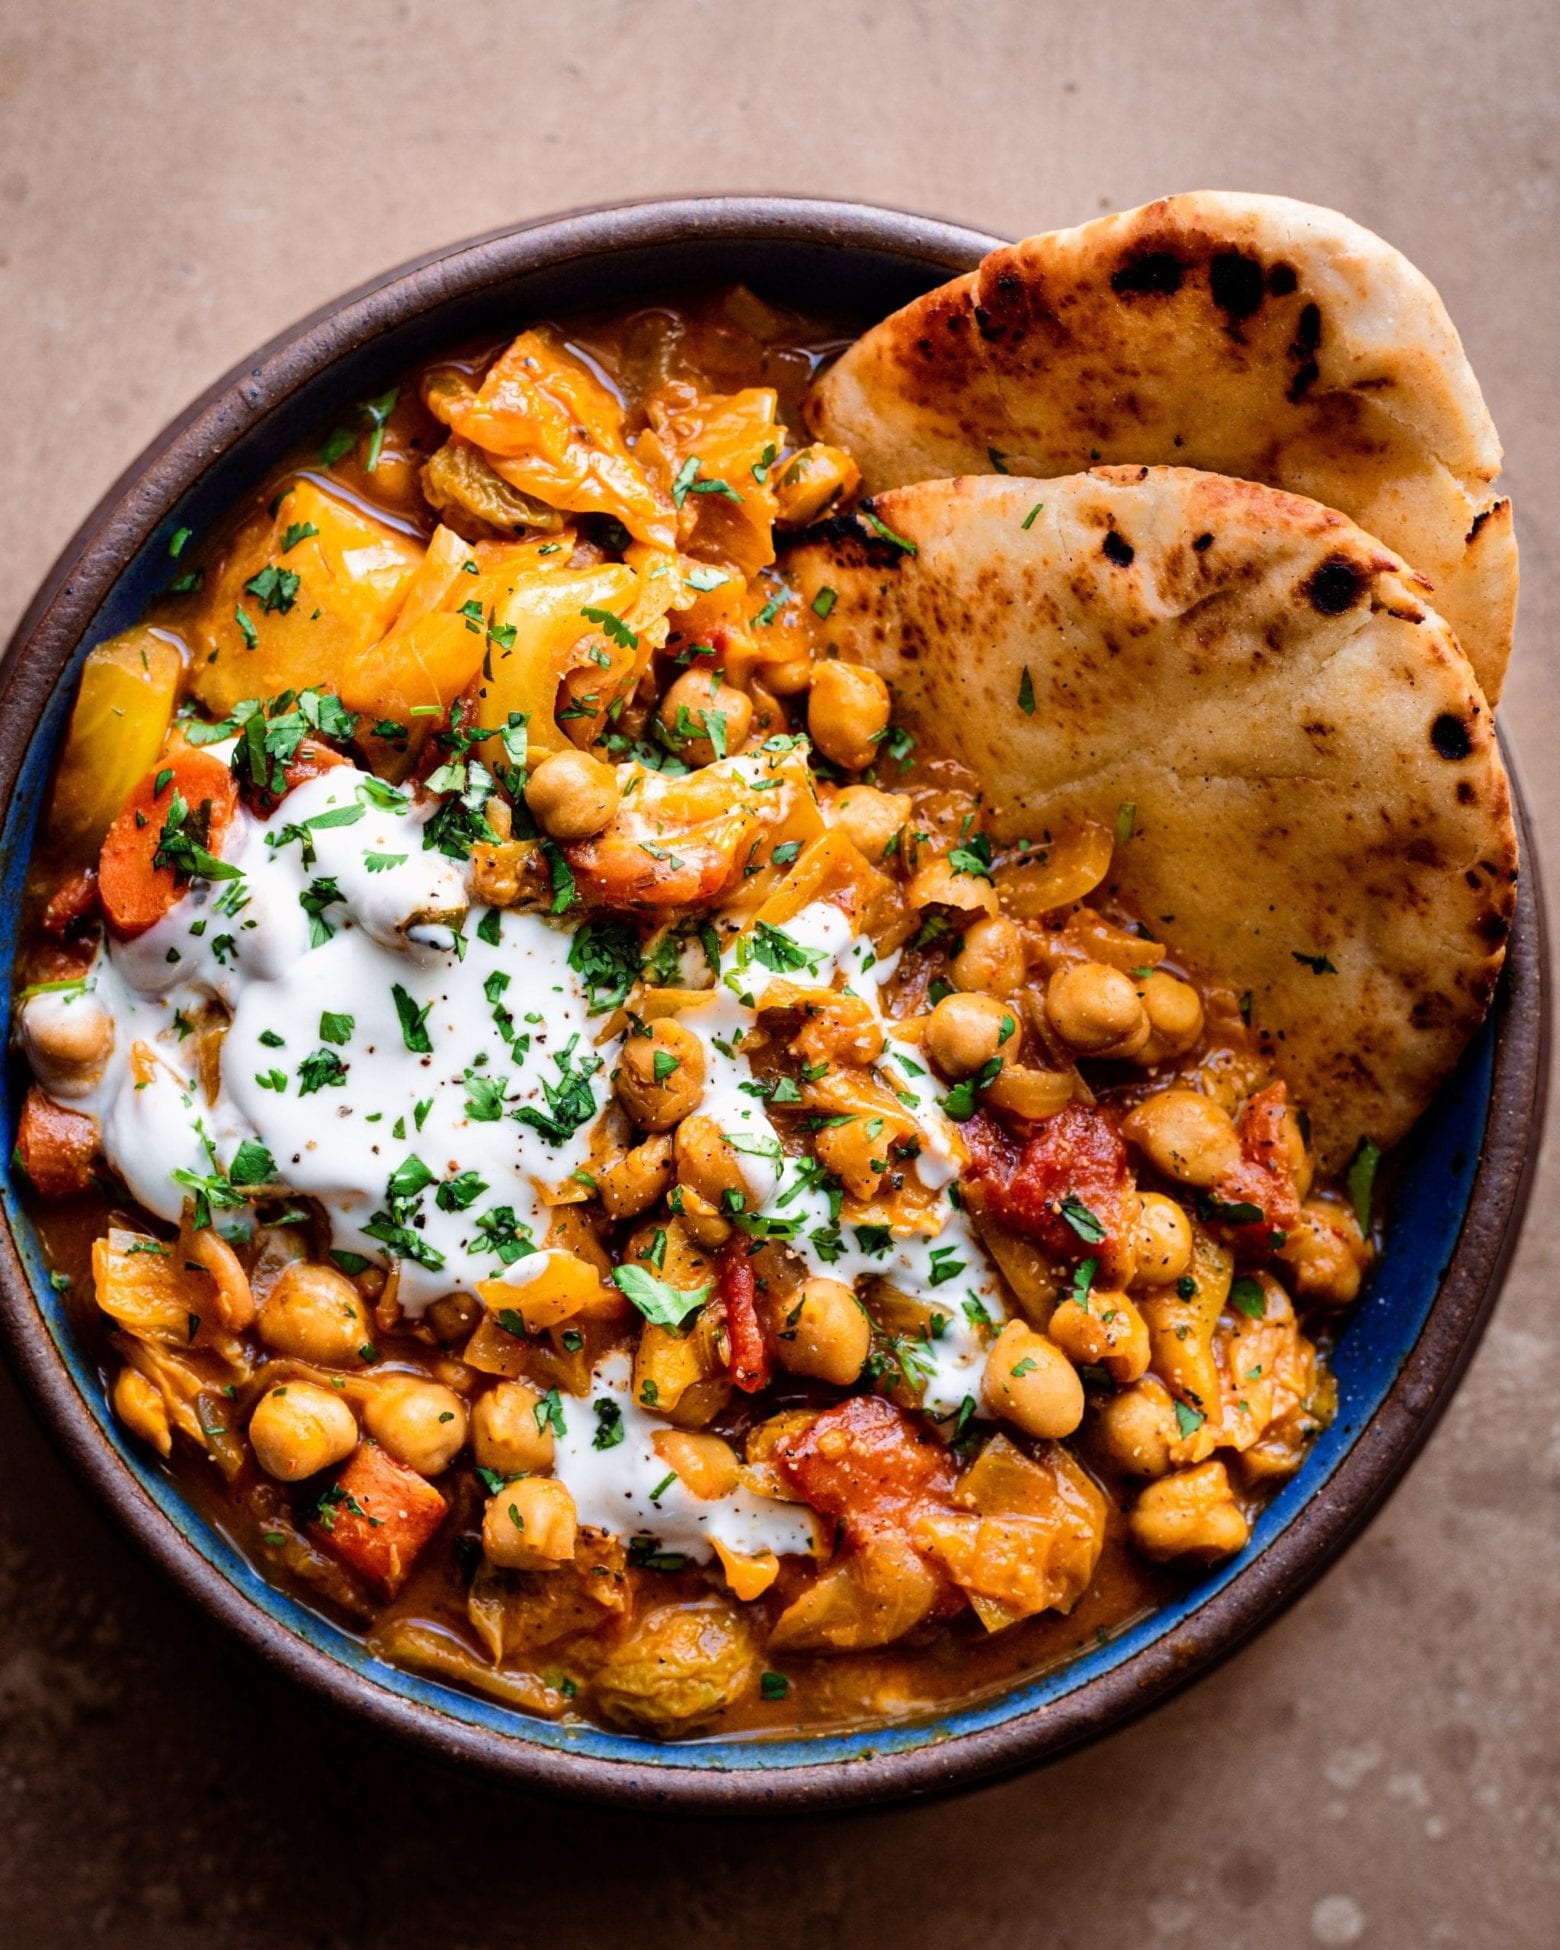 Braised Indian Chickpea Stew